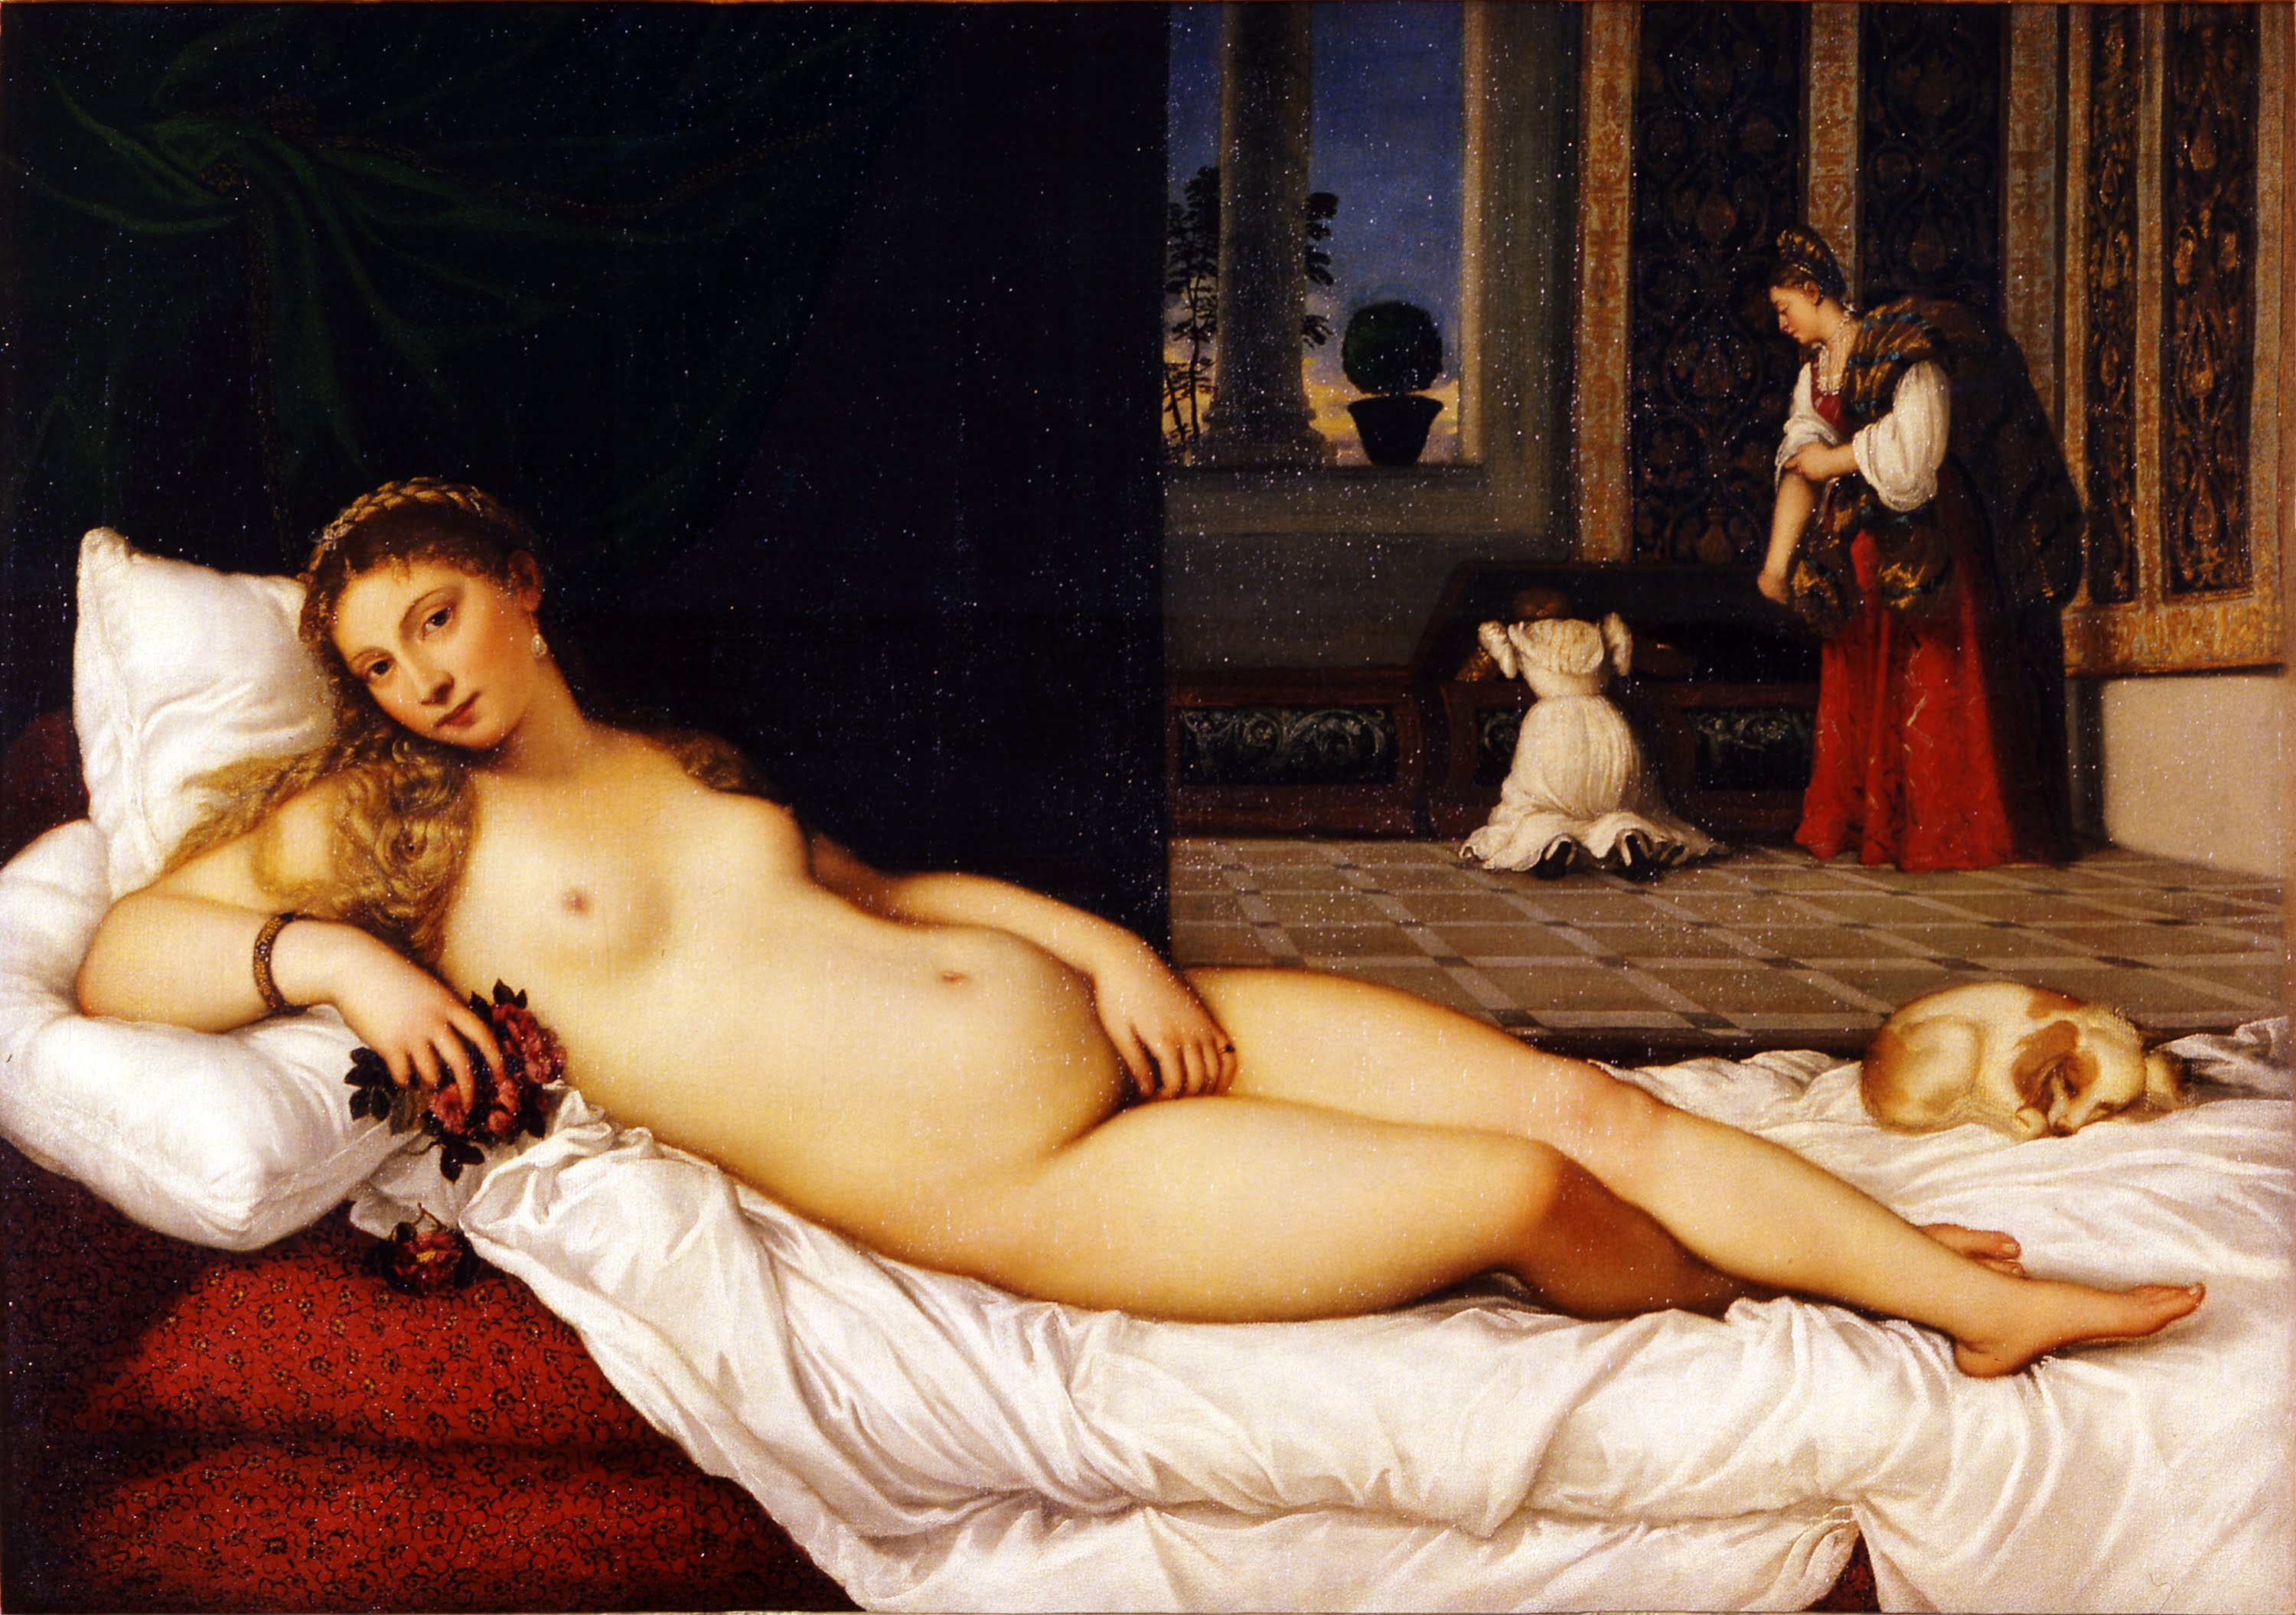 The top 10 female nudes in art | Art and design | The Guardian